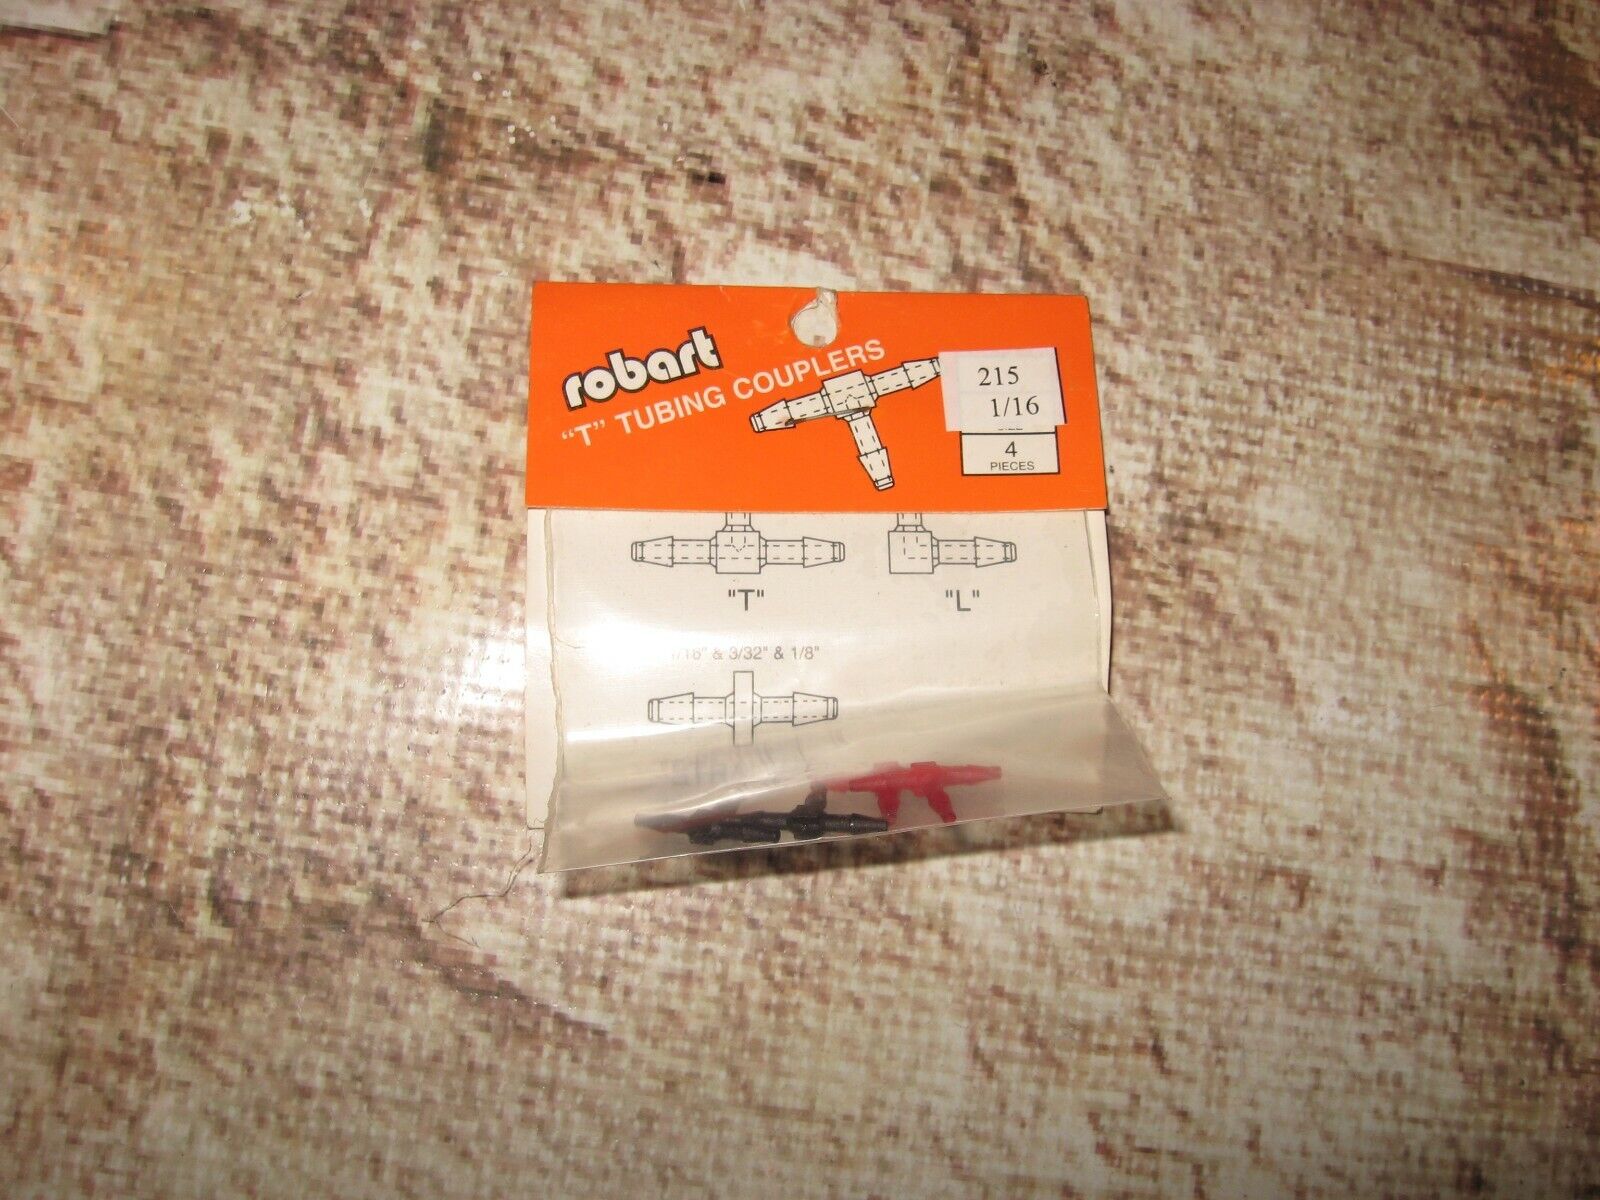 RC Aircraft Spares Robart 1/8" L Tubing Couplers Retract 222